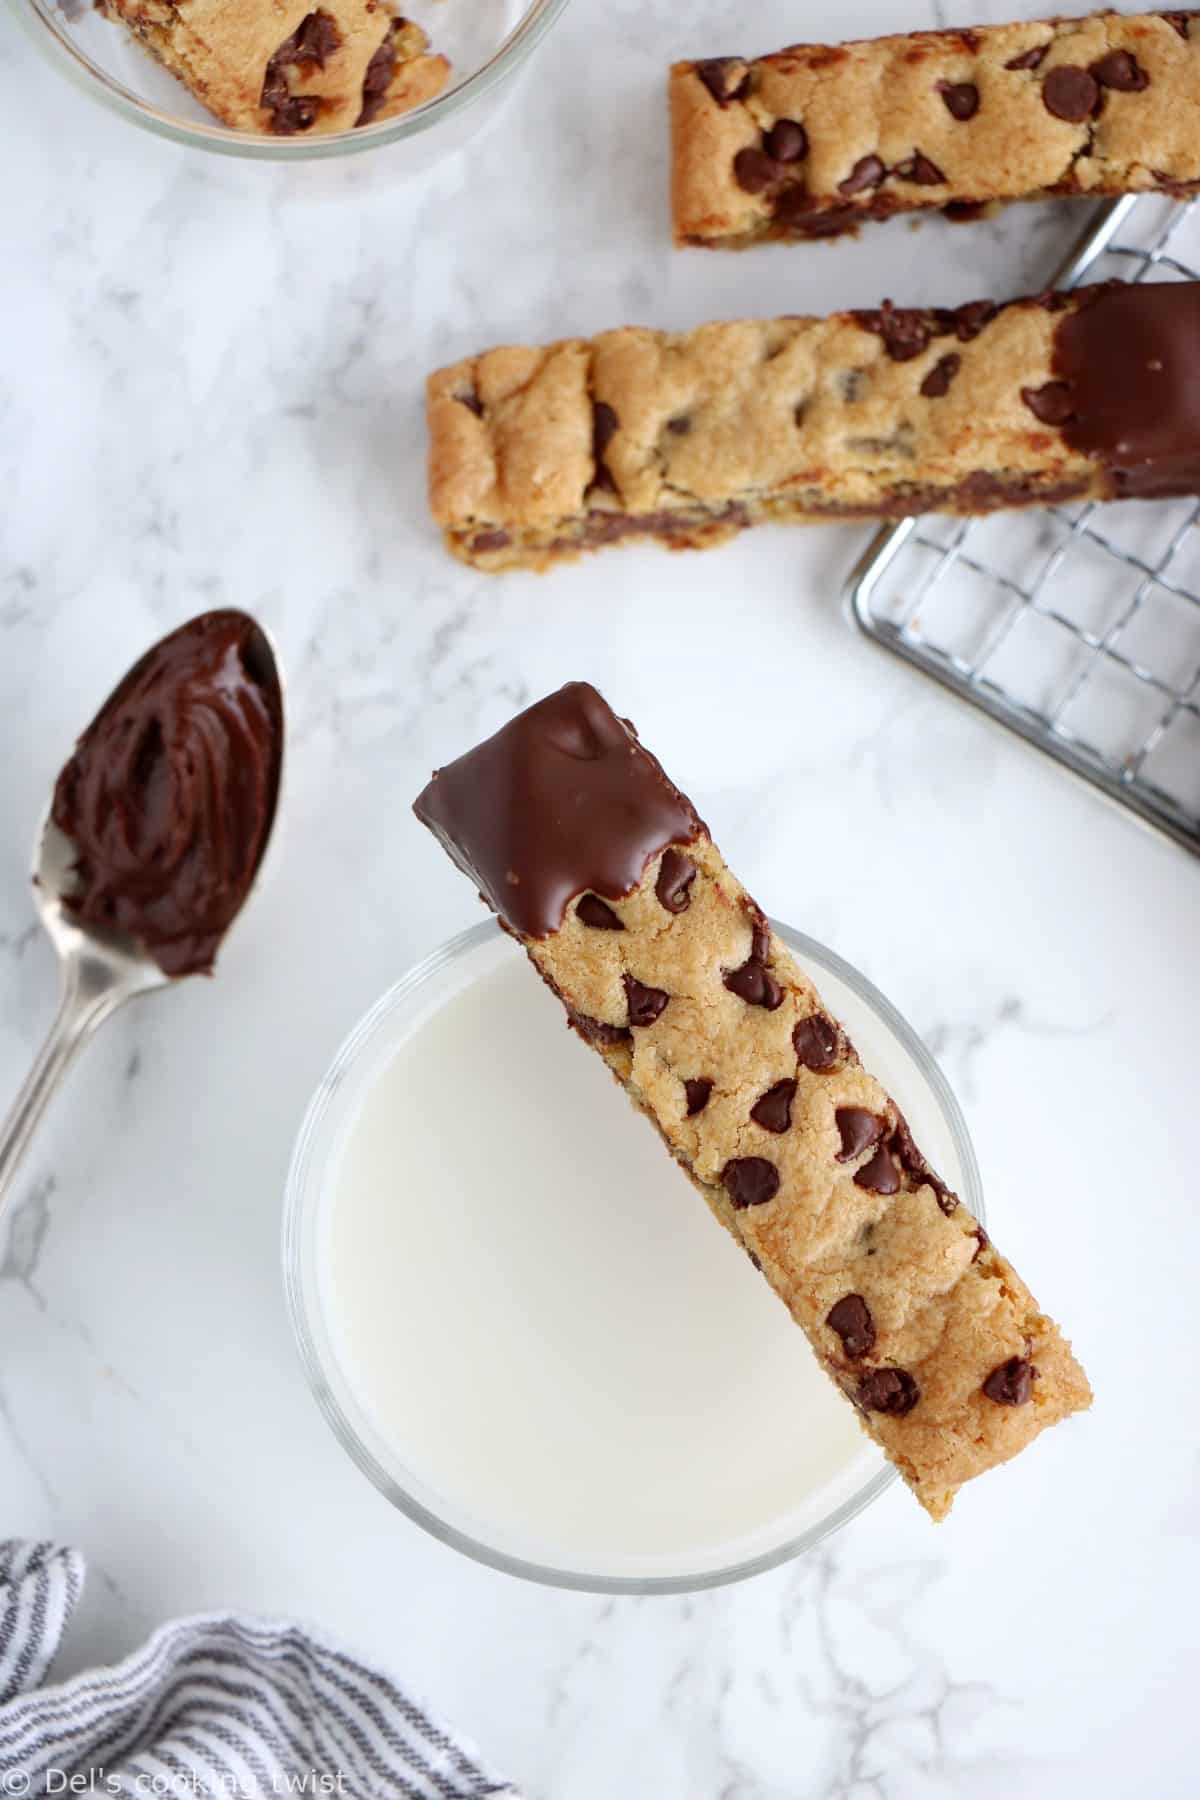 Chocolate-Dipped Cookie Sticks. Chocolate-dipped cookie sticks are a fun twist to your classic cookies and just perfect for dunking into a cold glass of milk. Made in a pan for easy baking, they are chewy, slightly crispy, with an irresistible chocolate coating!